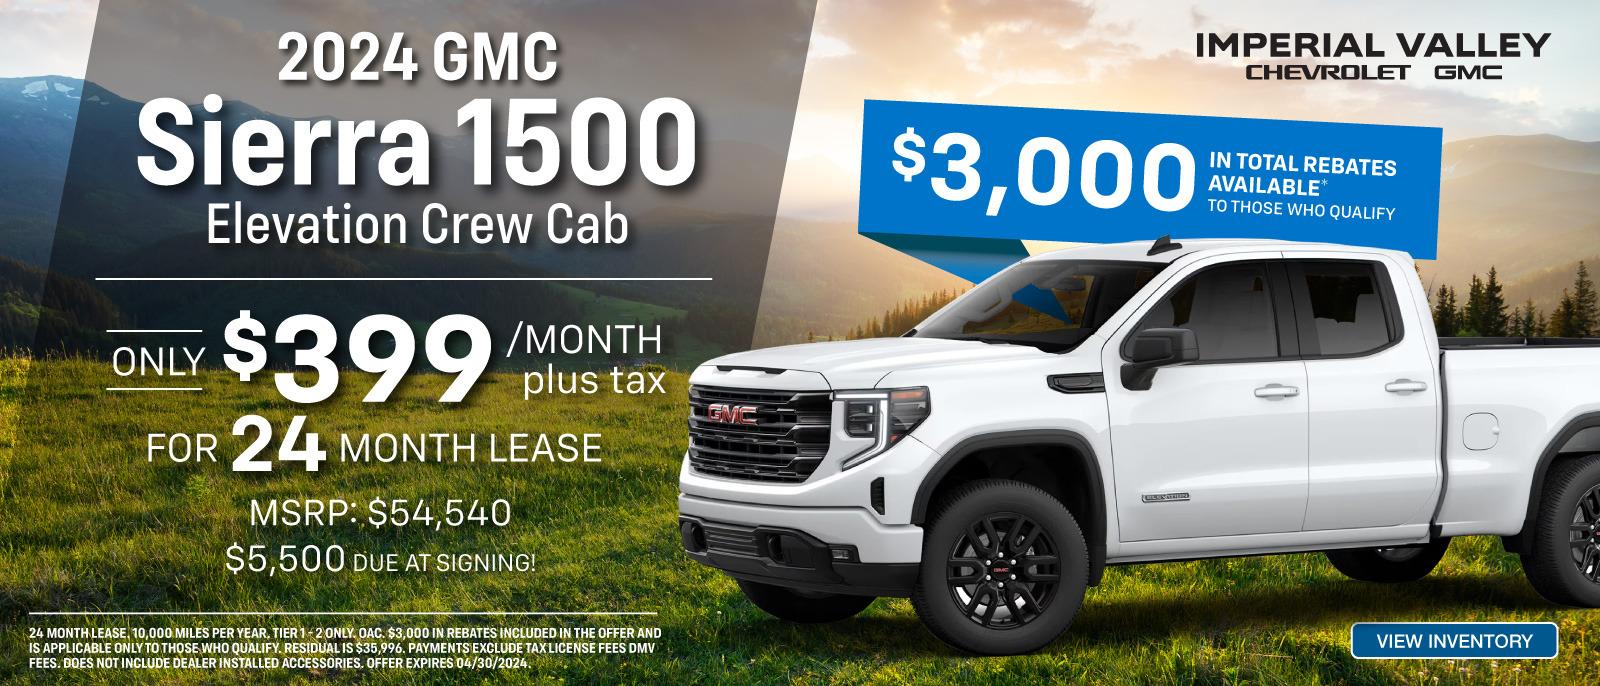 2024 GMC Sierra 1500 Elevation Crew Cab for $399 per month